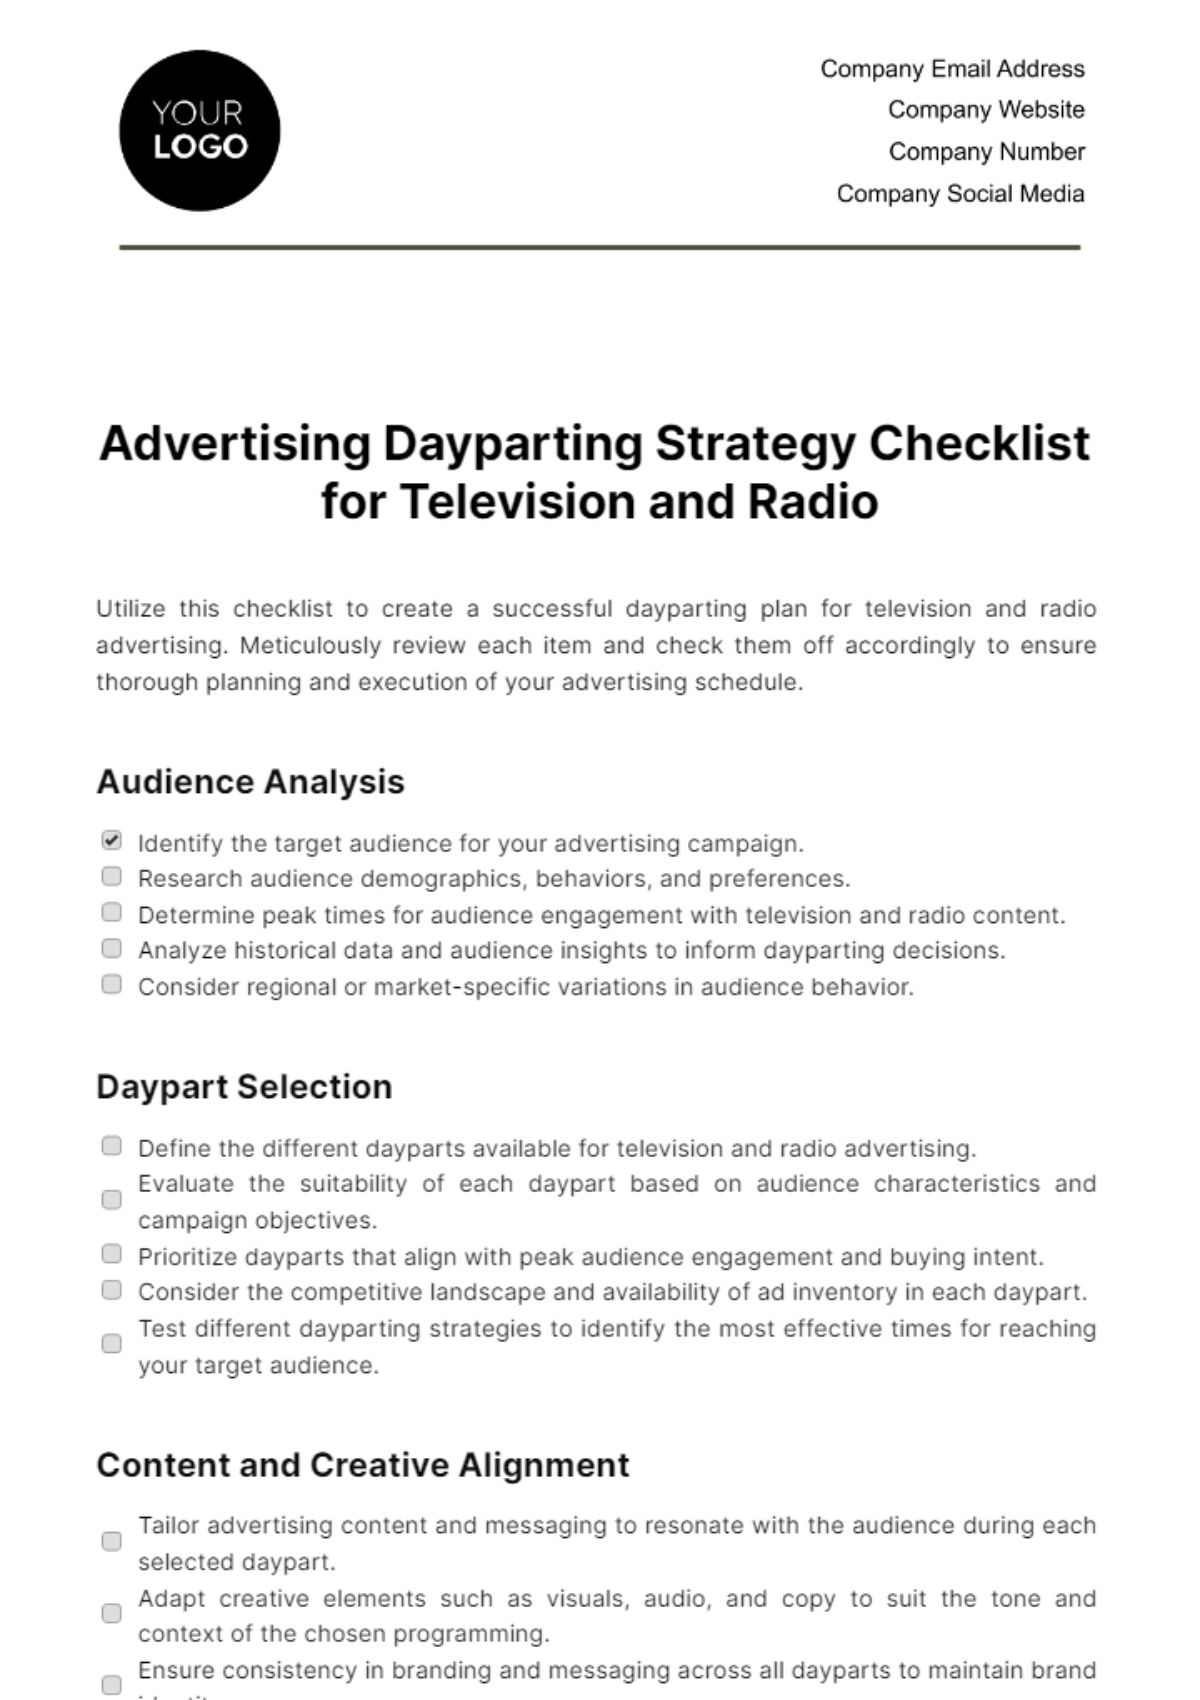 Advertising Dayparting Strategy Checklist for Television and Radio Template